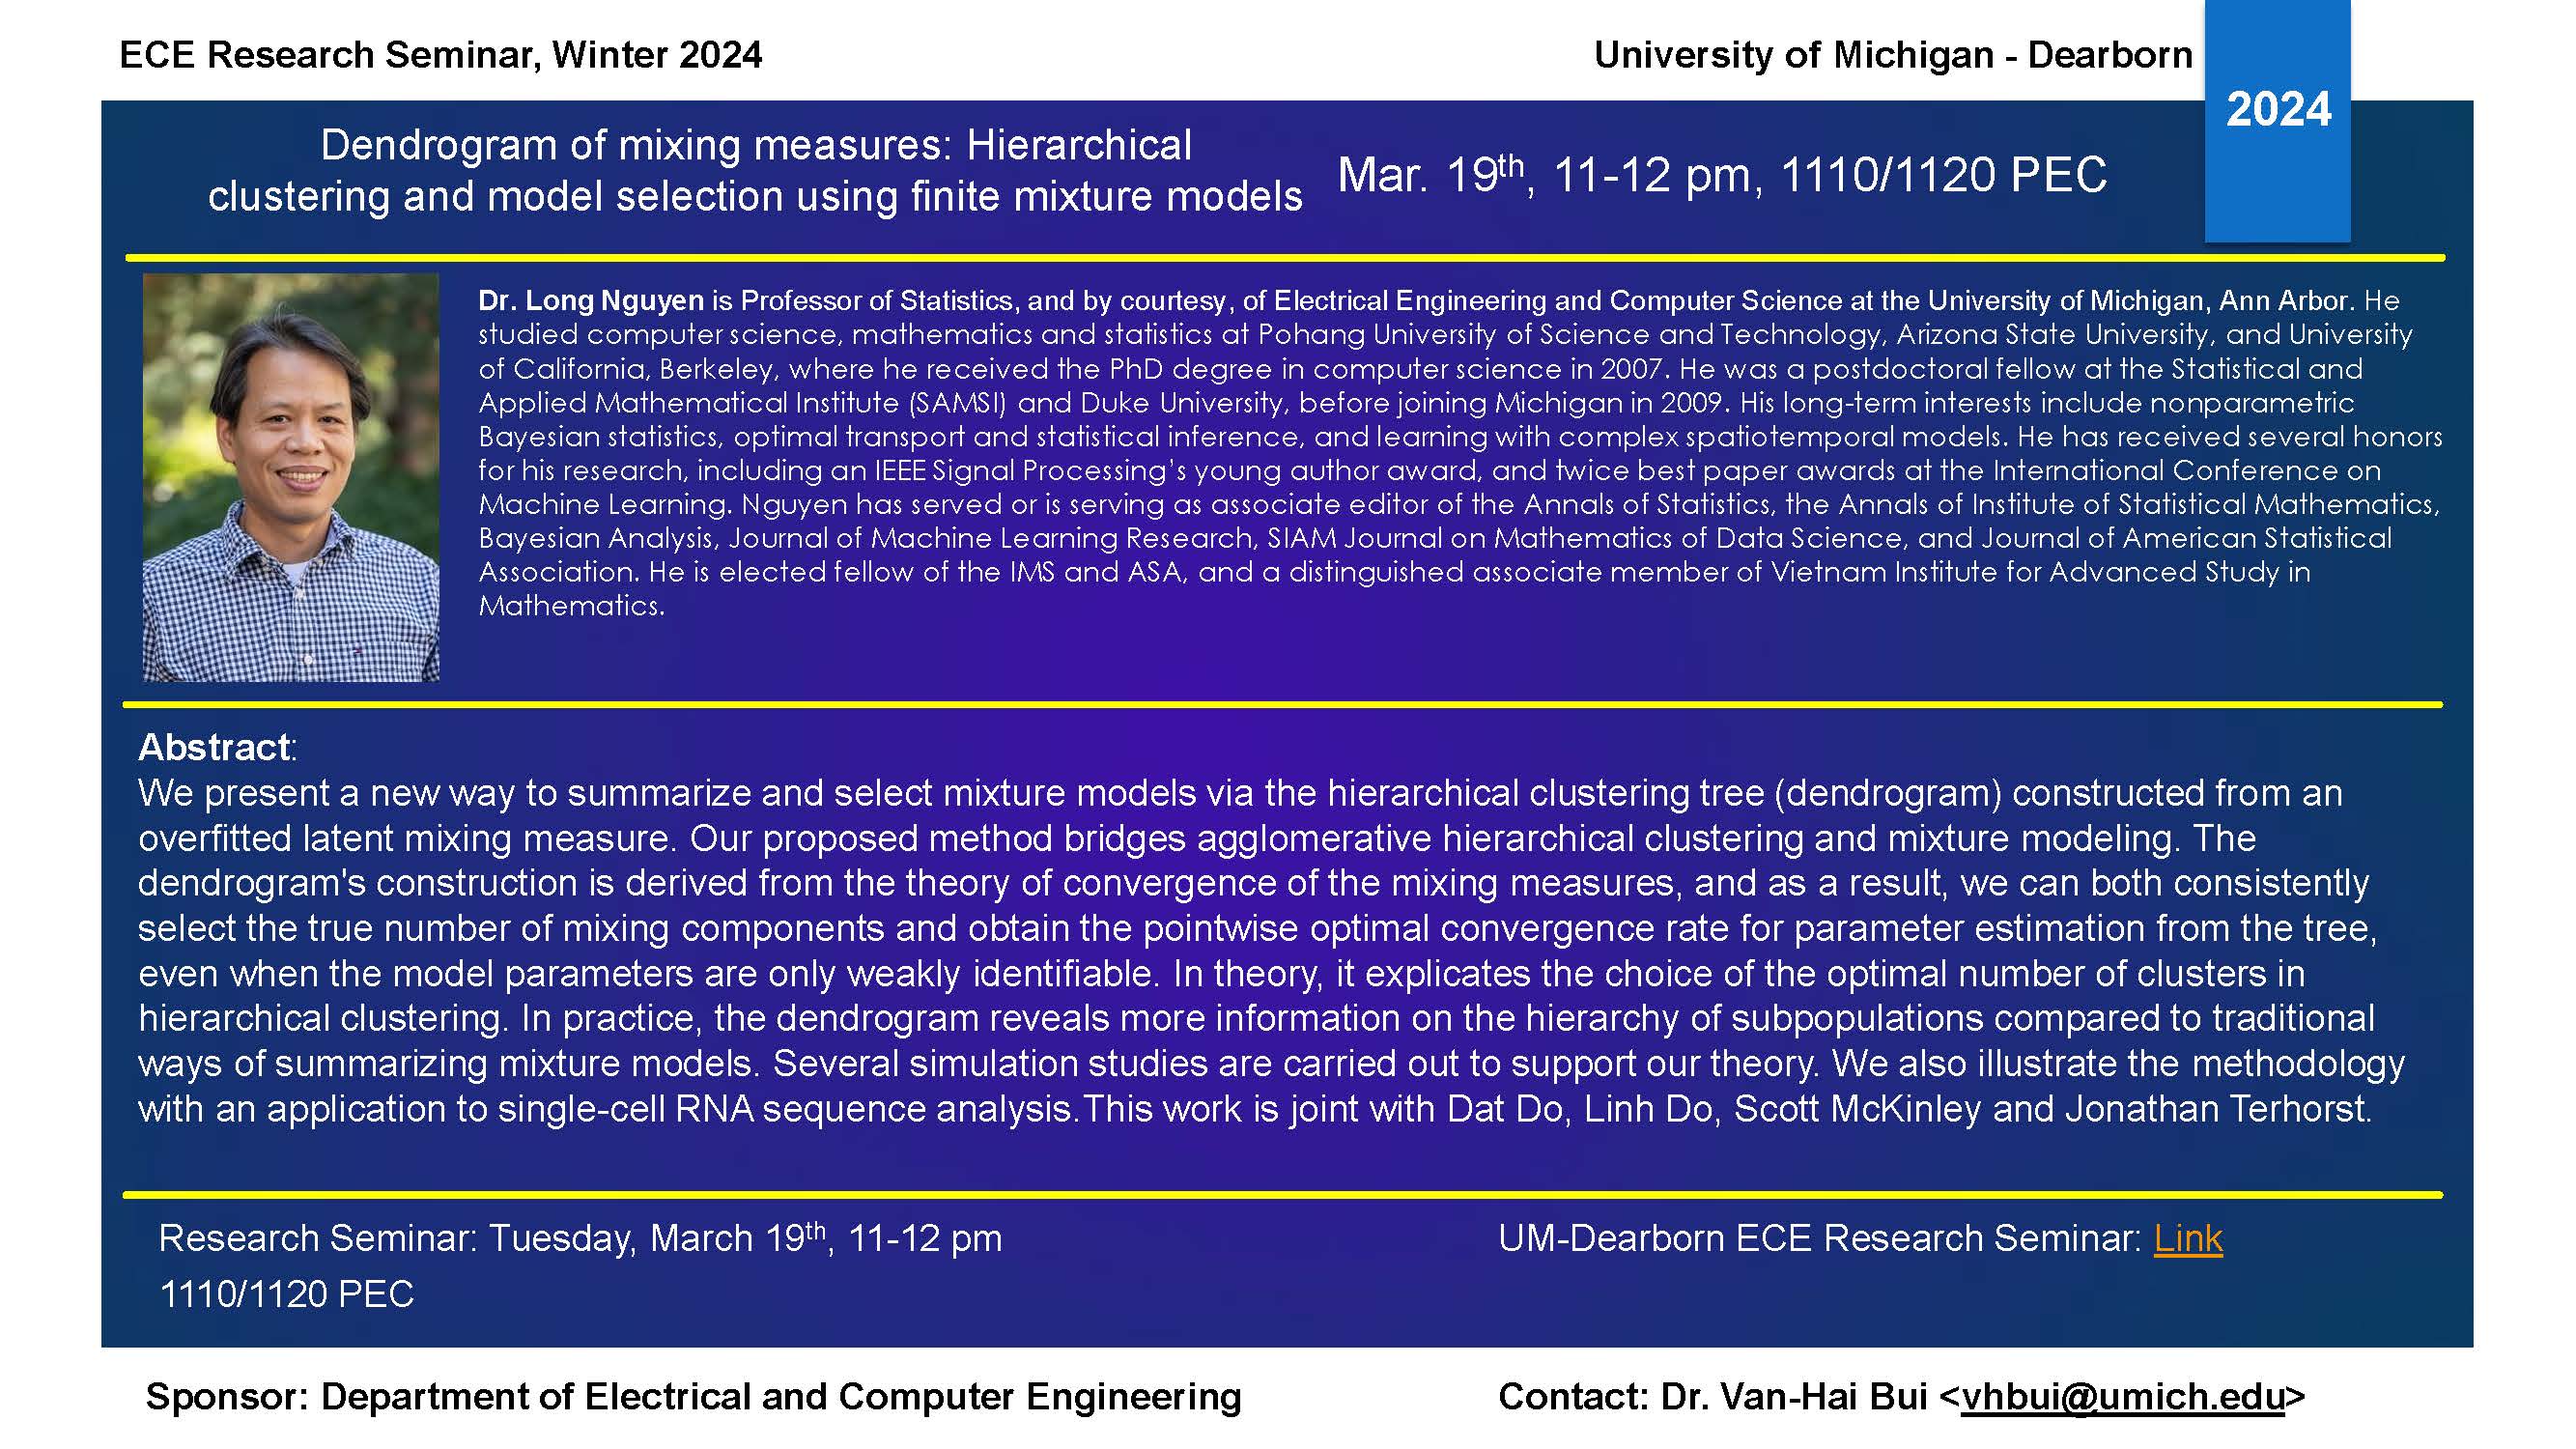 PDF flyer for the Dendrogram of Mixing Measures: Hierarchical Clustering and Model Selection Using Finite Mixture Models ECE Research Seminar presented by Professor Long Nguyen from the University of Michigan Ann Arbor.